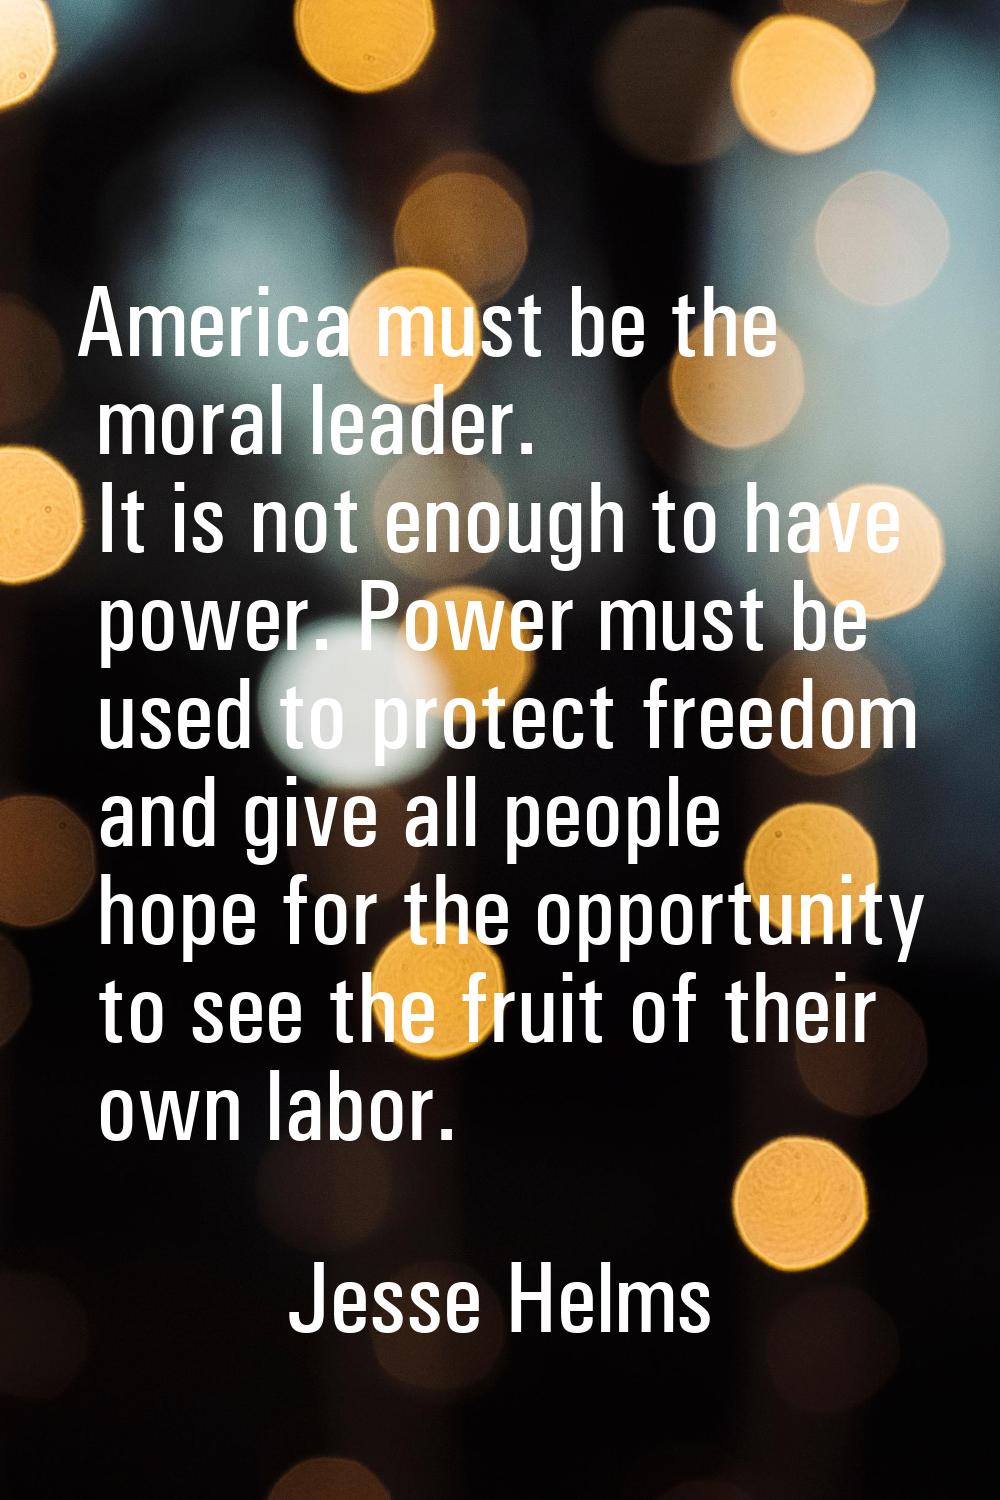 America must be the moral leader. It is not enough to have power. Power must be used to protect fre